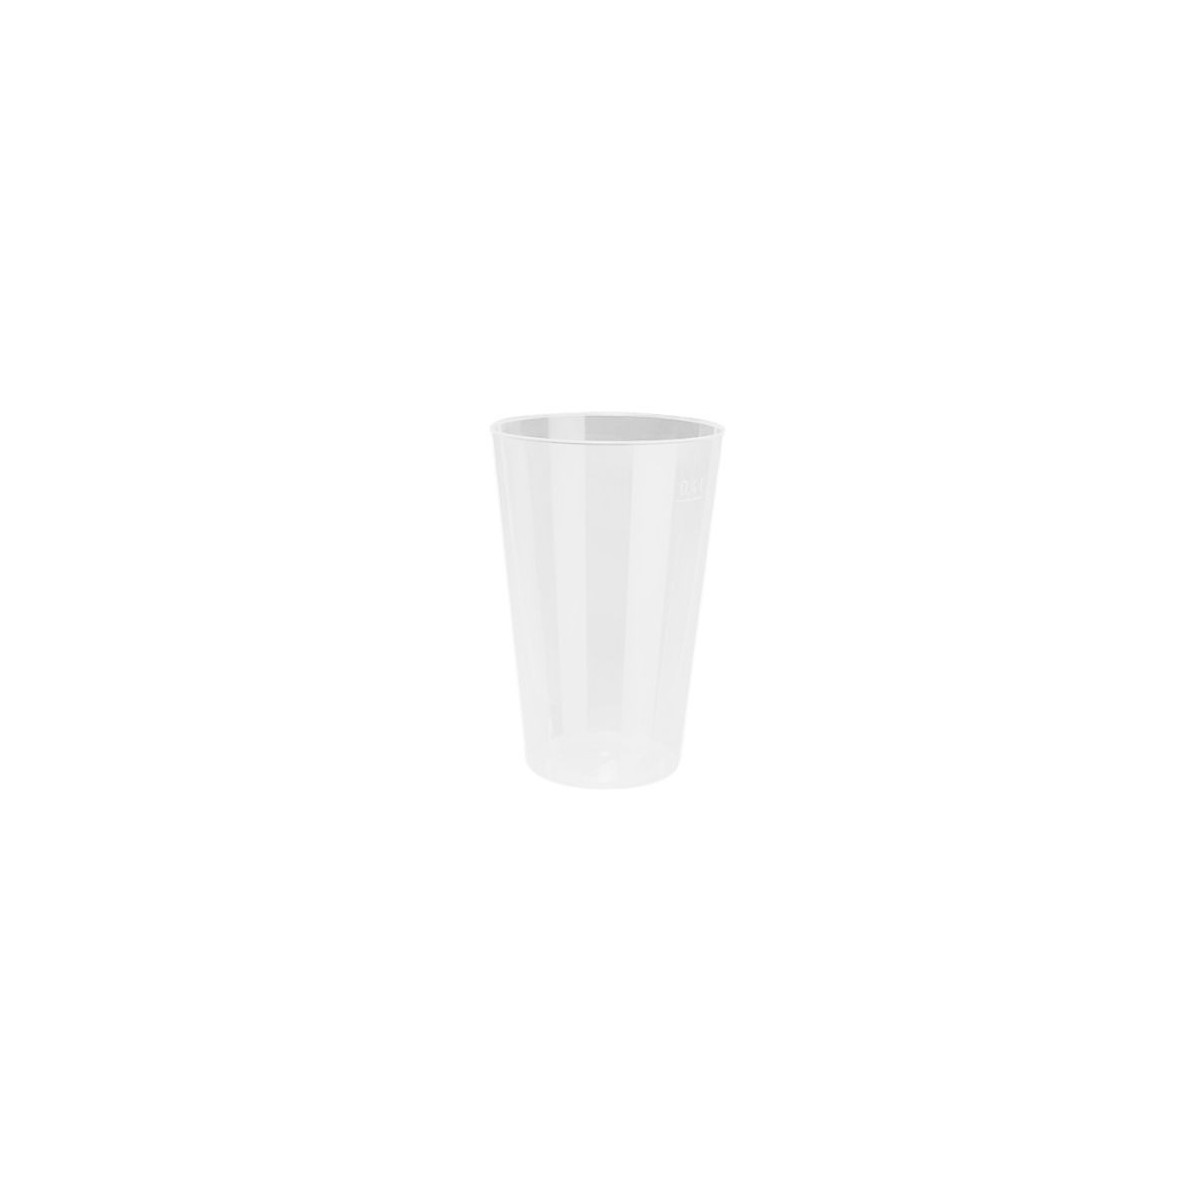 PP CLEAR REUSABLE DRINKING GLASS 8,6X13CM 400ML 50PCS